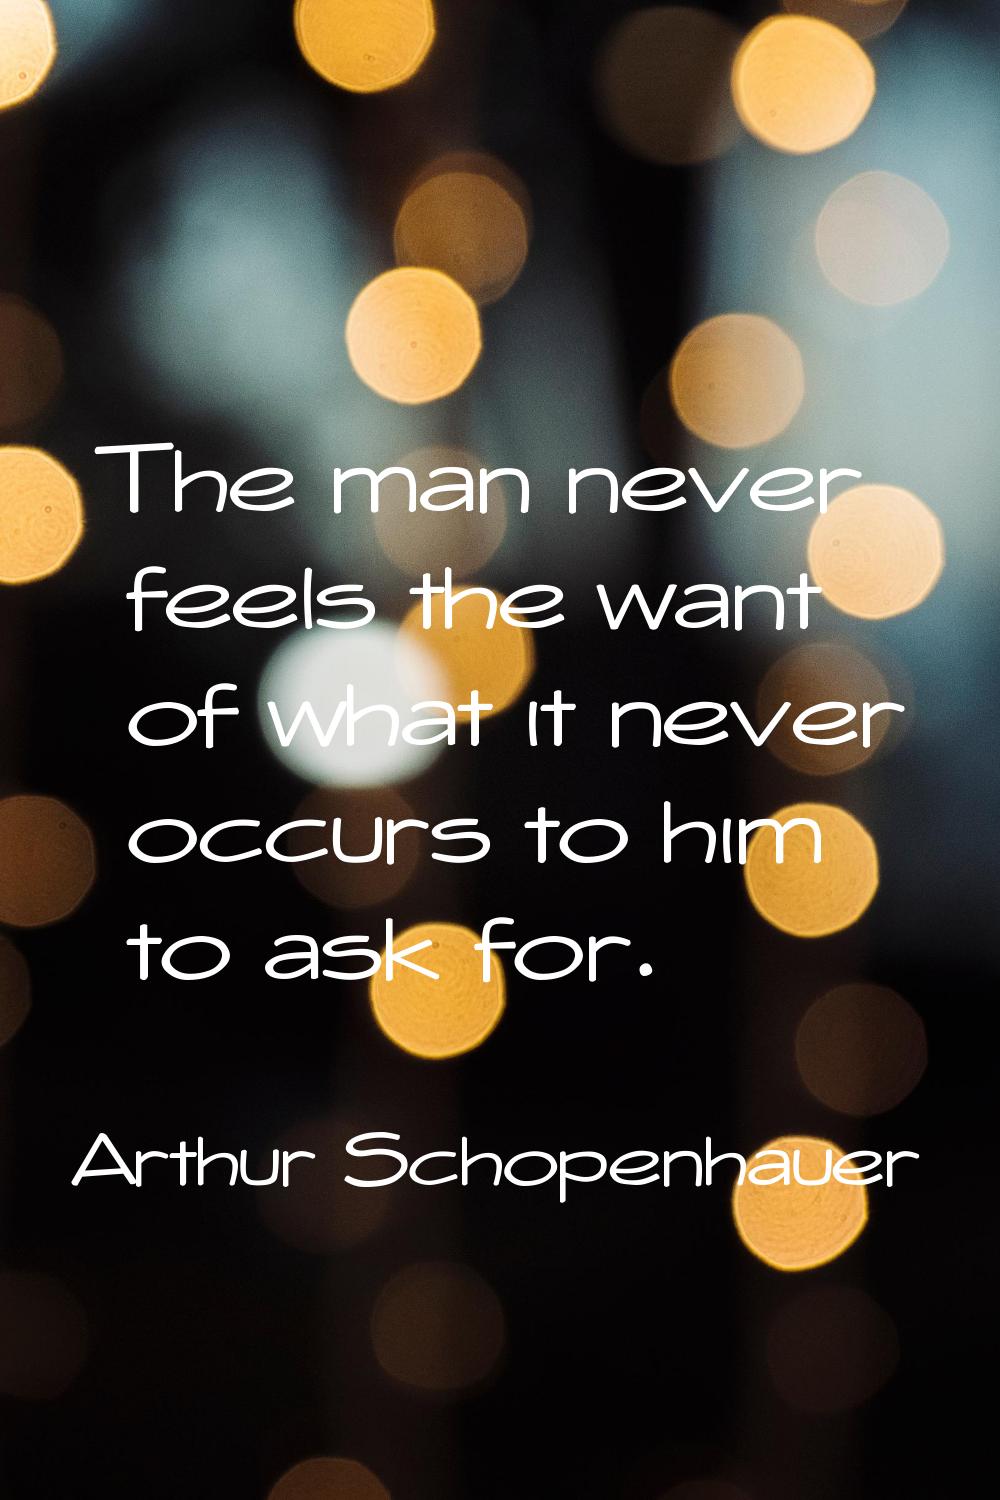 The man never feels the want of what it never occurs to him to ask for.